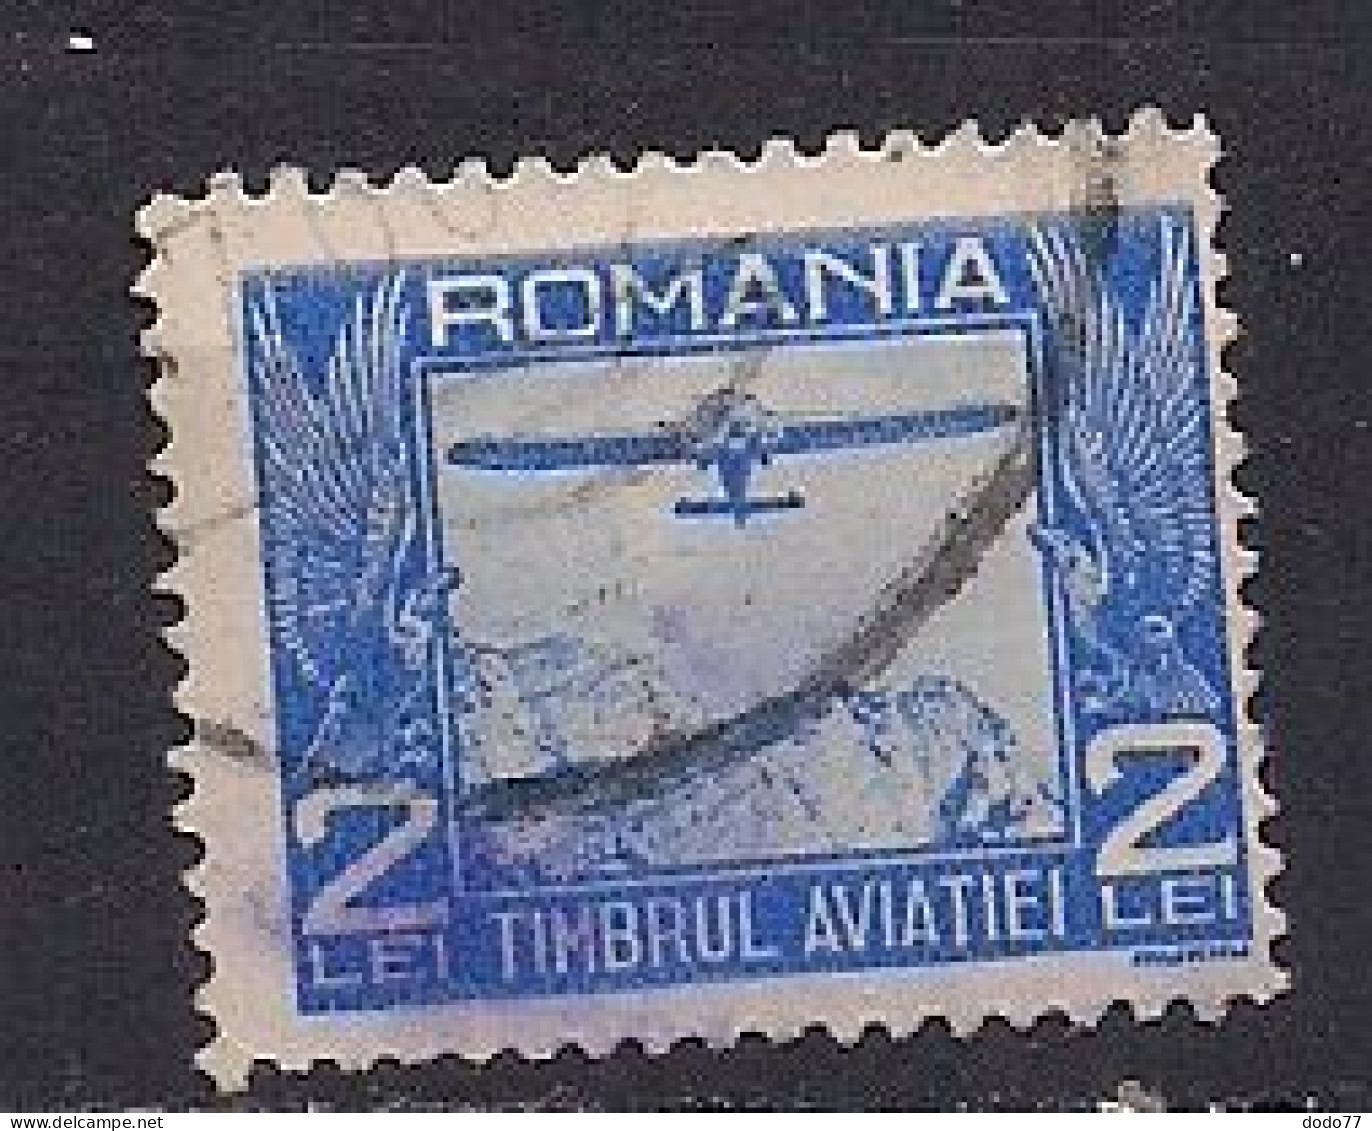 ROUMANIE    POSTE AERIENNE     N°   13  OBLITERE - Used Stamps